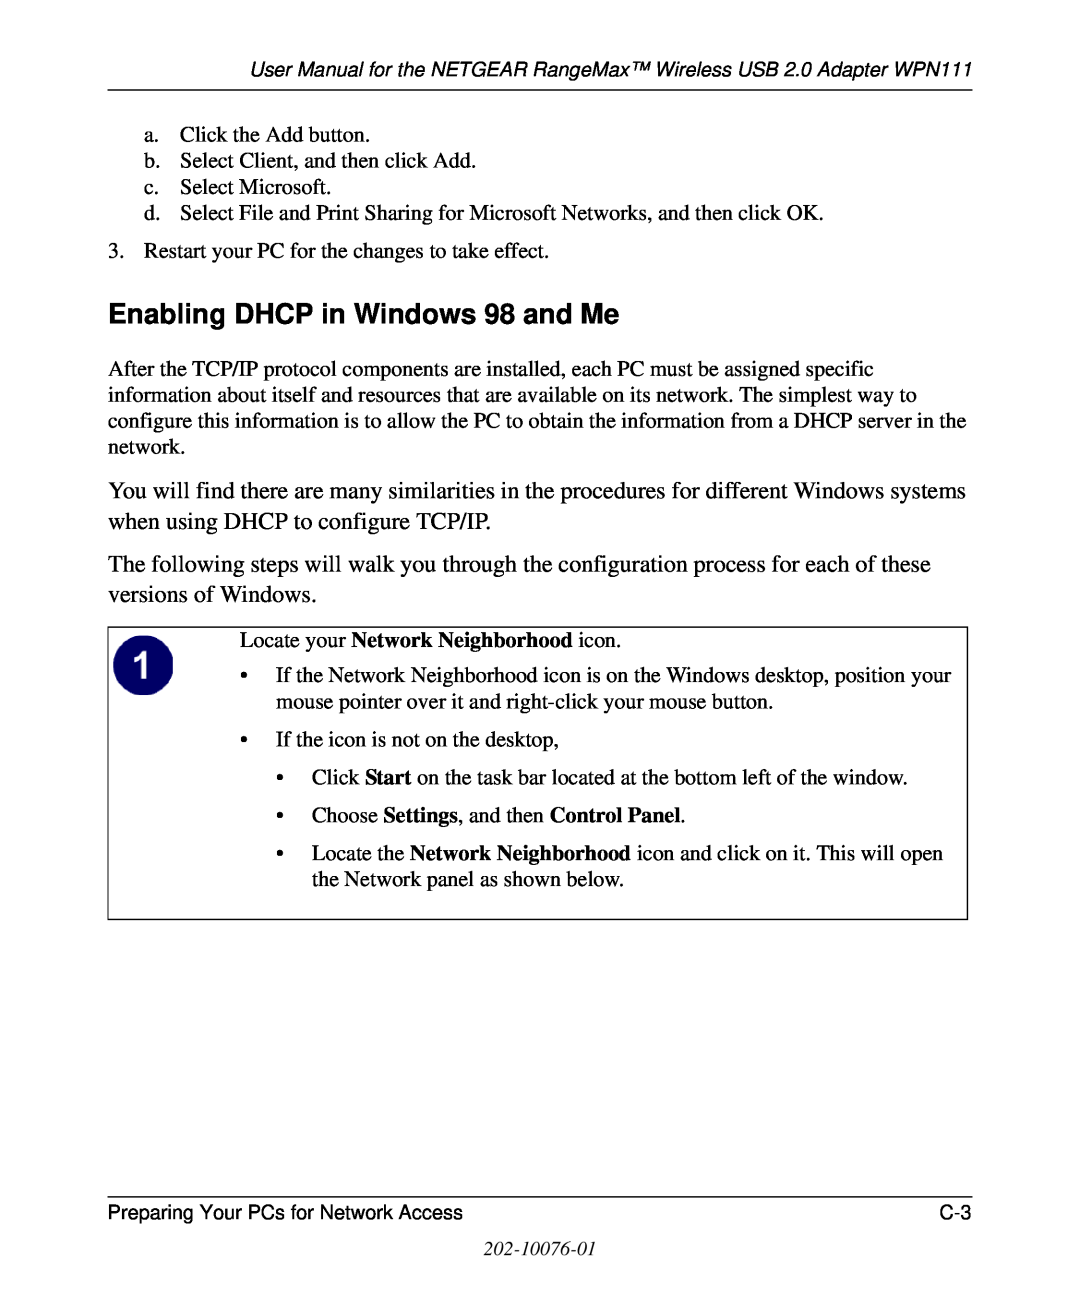 NETGEAR WPN111 user manual Enabling DHCP in Windows 98 and Me, Locate your Network Neighborhood icon 